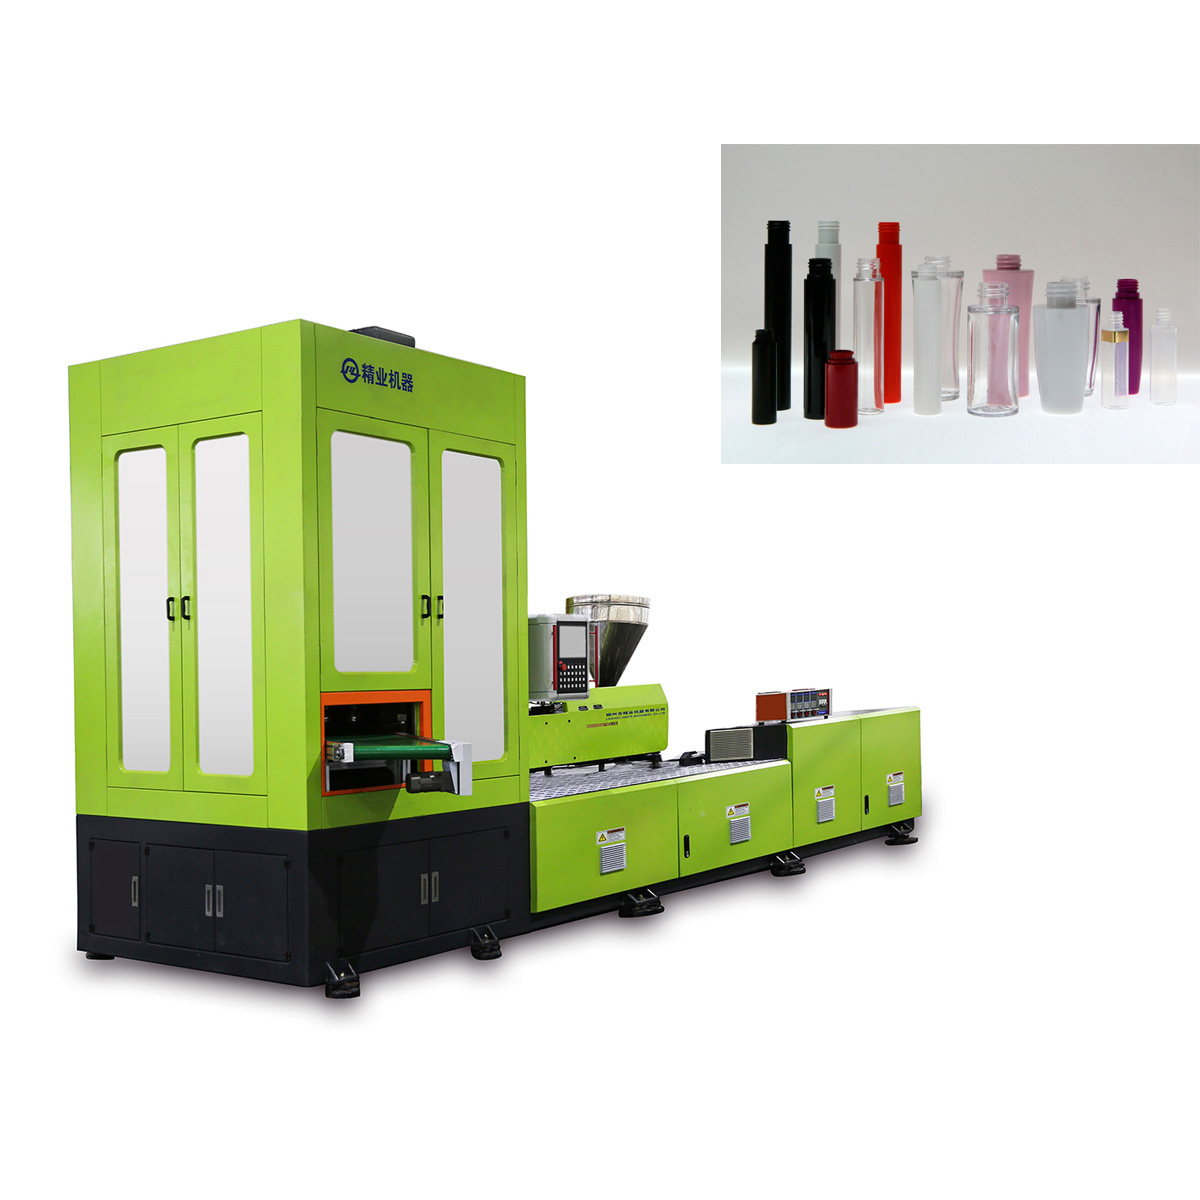 Single Stage Injection Stretch Blow Molding (ISBM) Machine For Making Cosmetic Packaging Bottles Featured Image